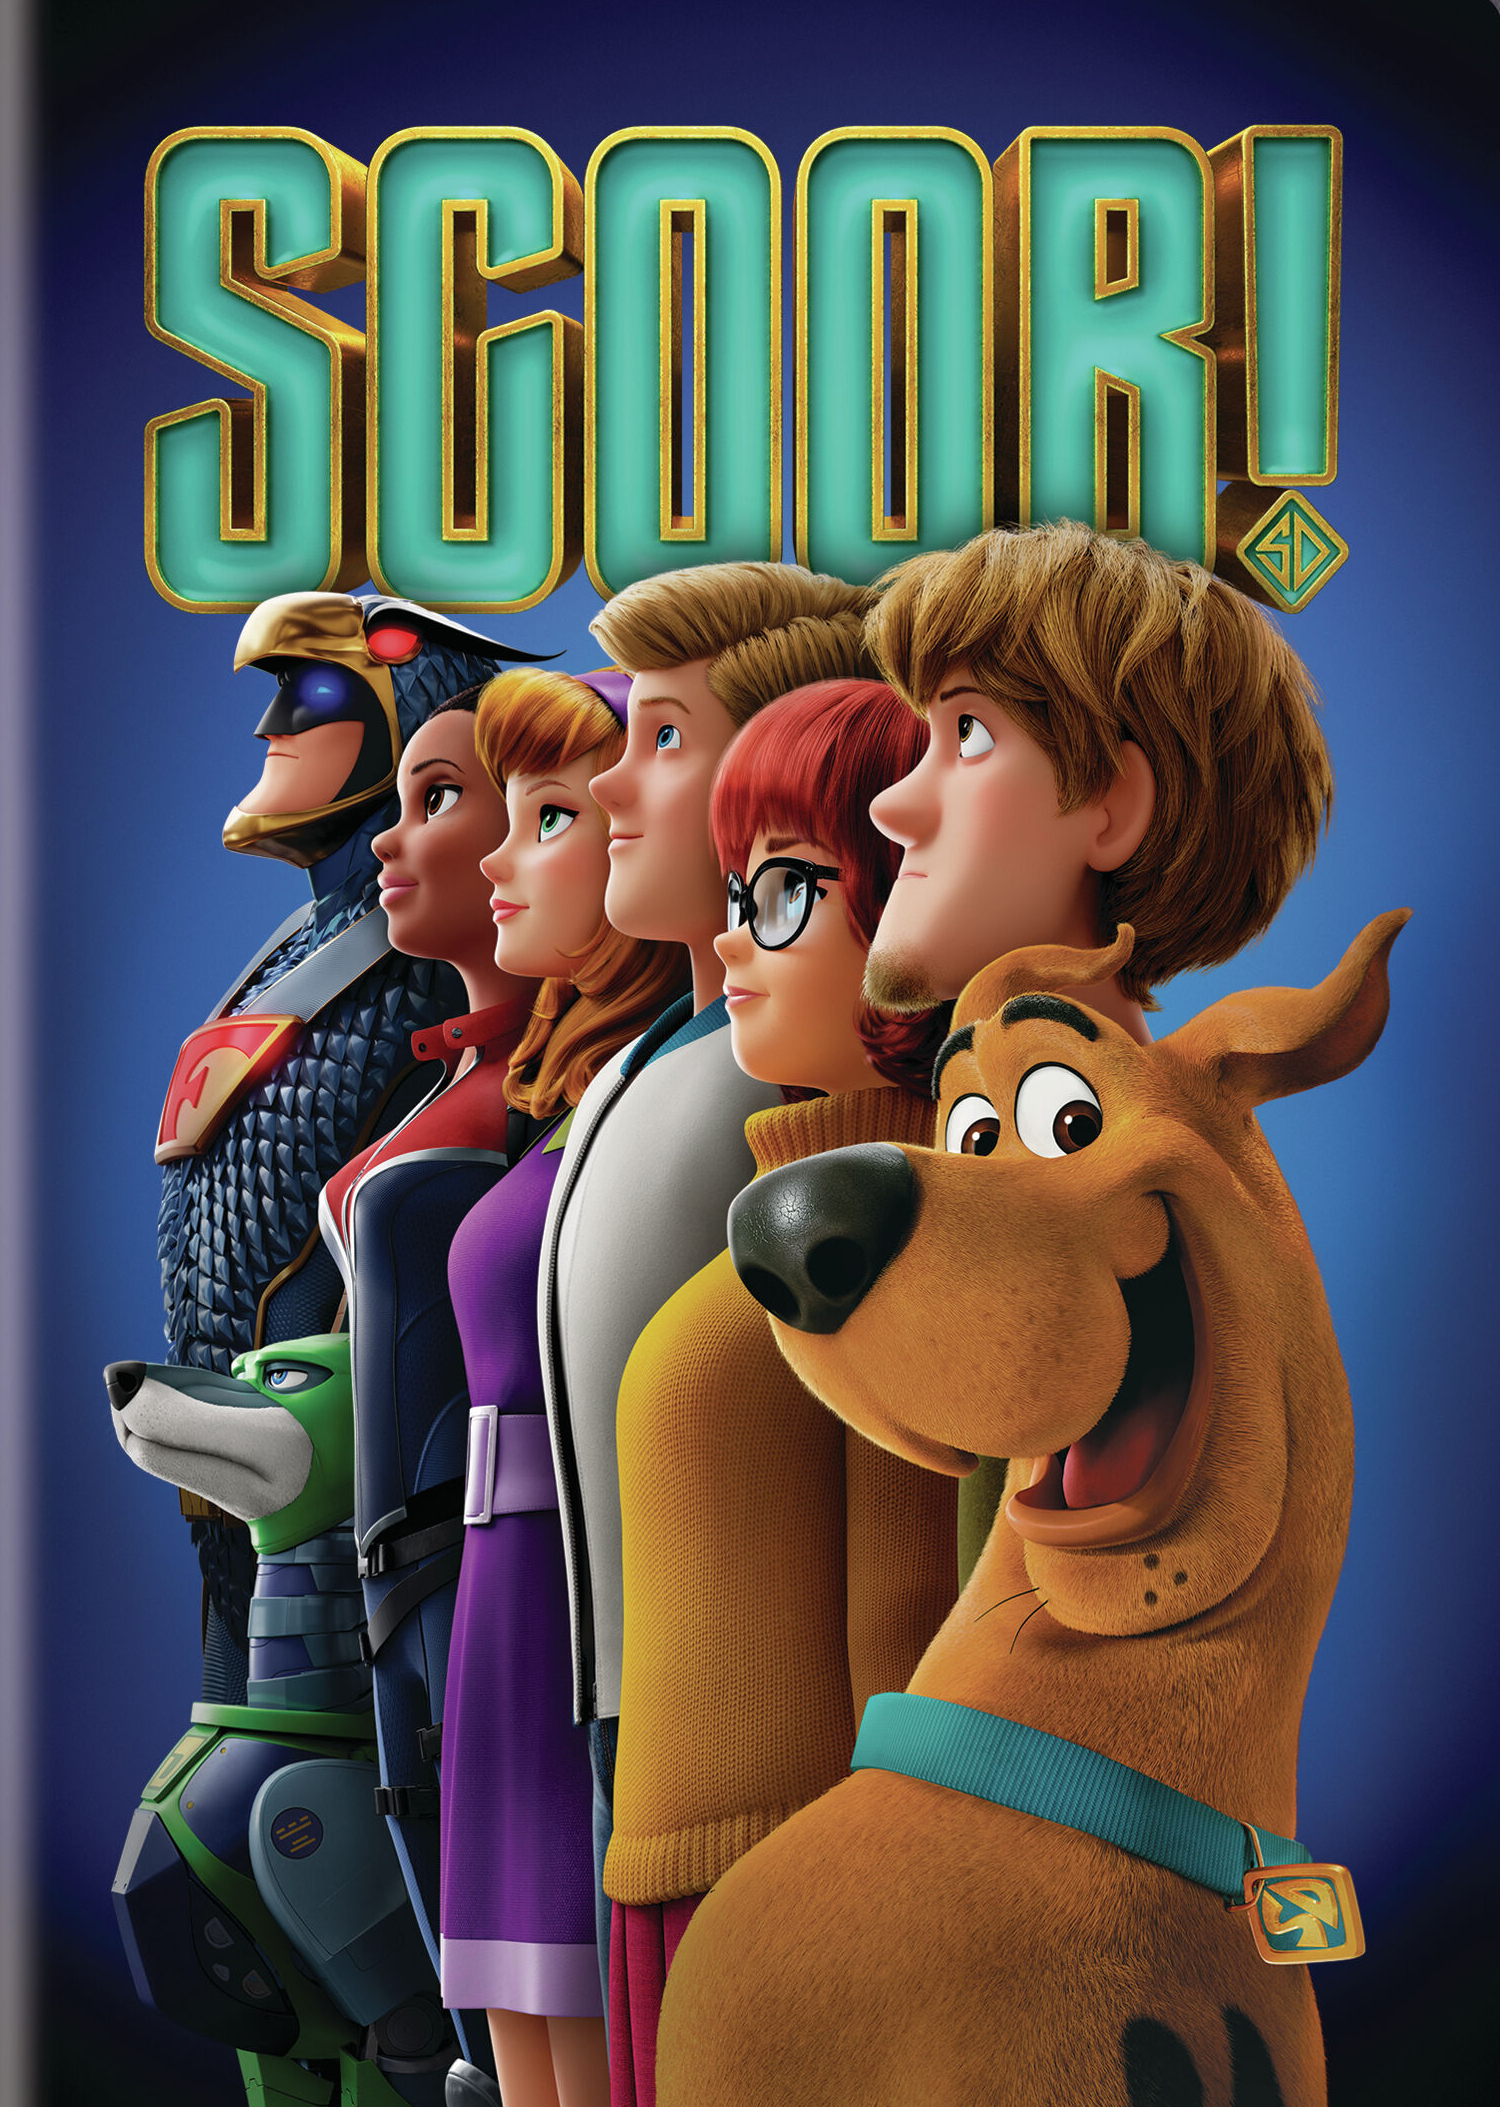 Movie Poster for Scoob! Image shows the main characters.